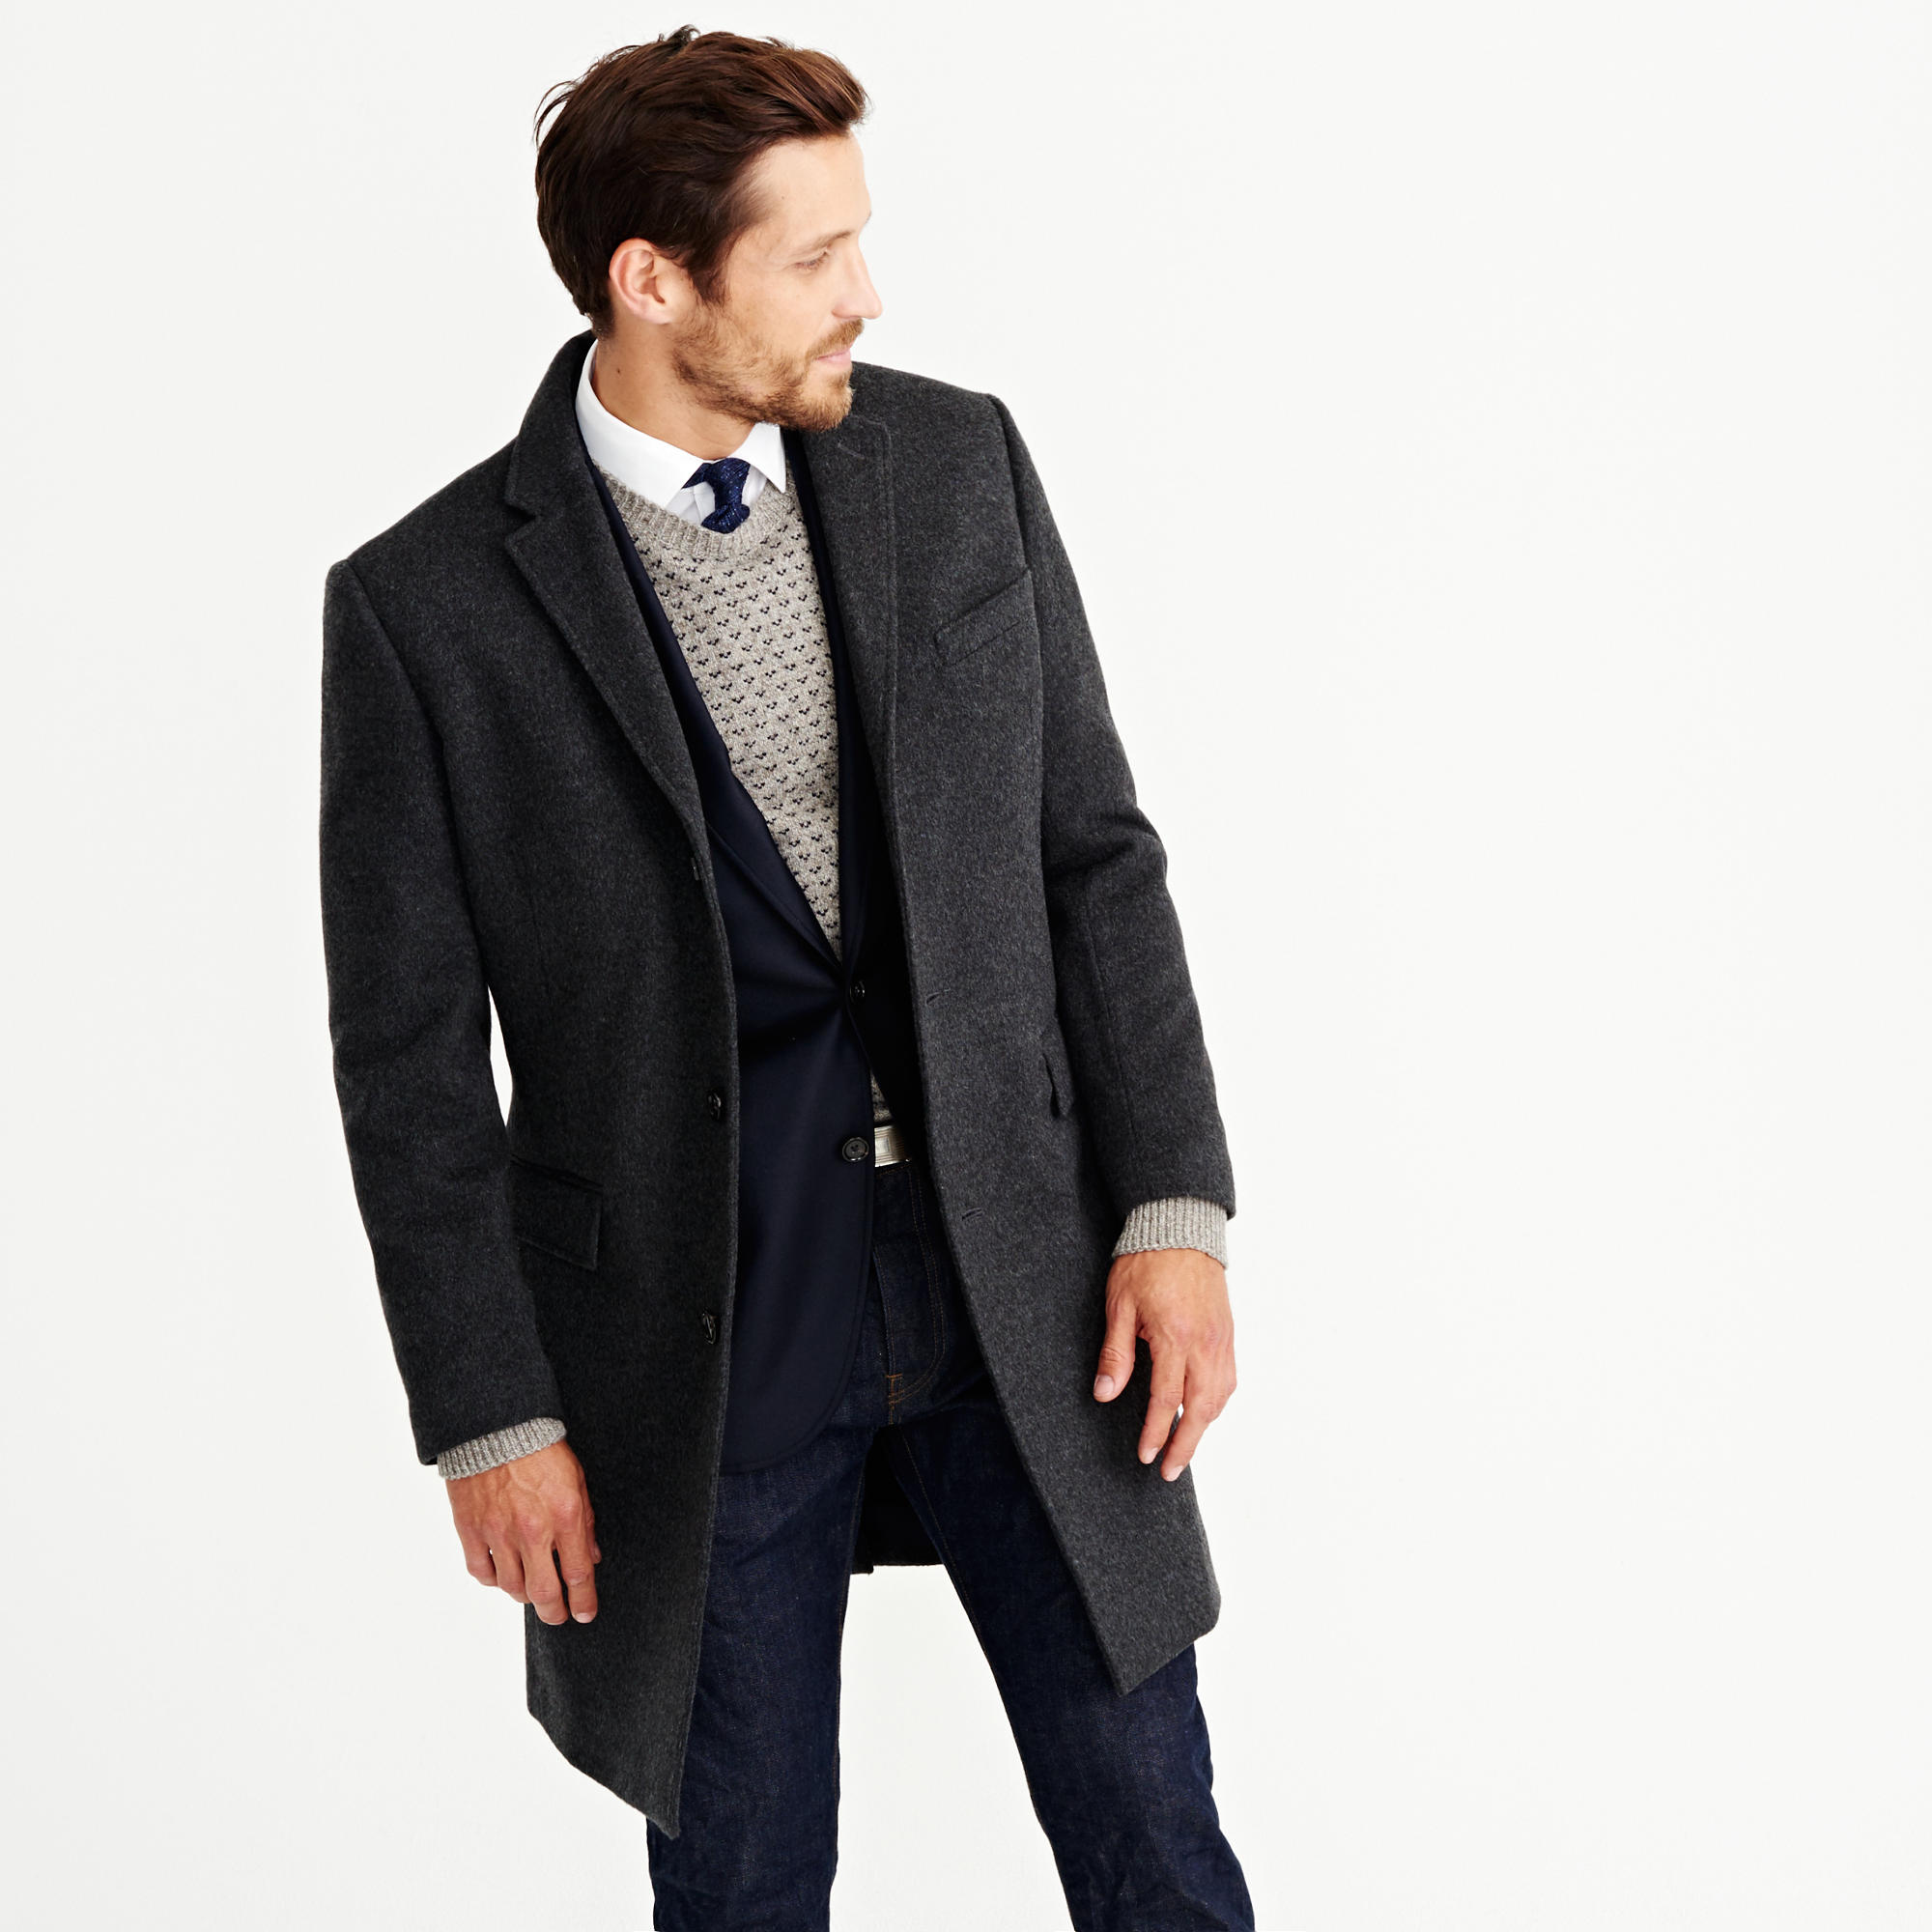 The Perfect Fit: Topcoats